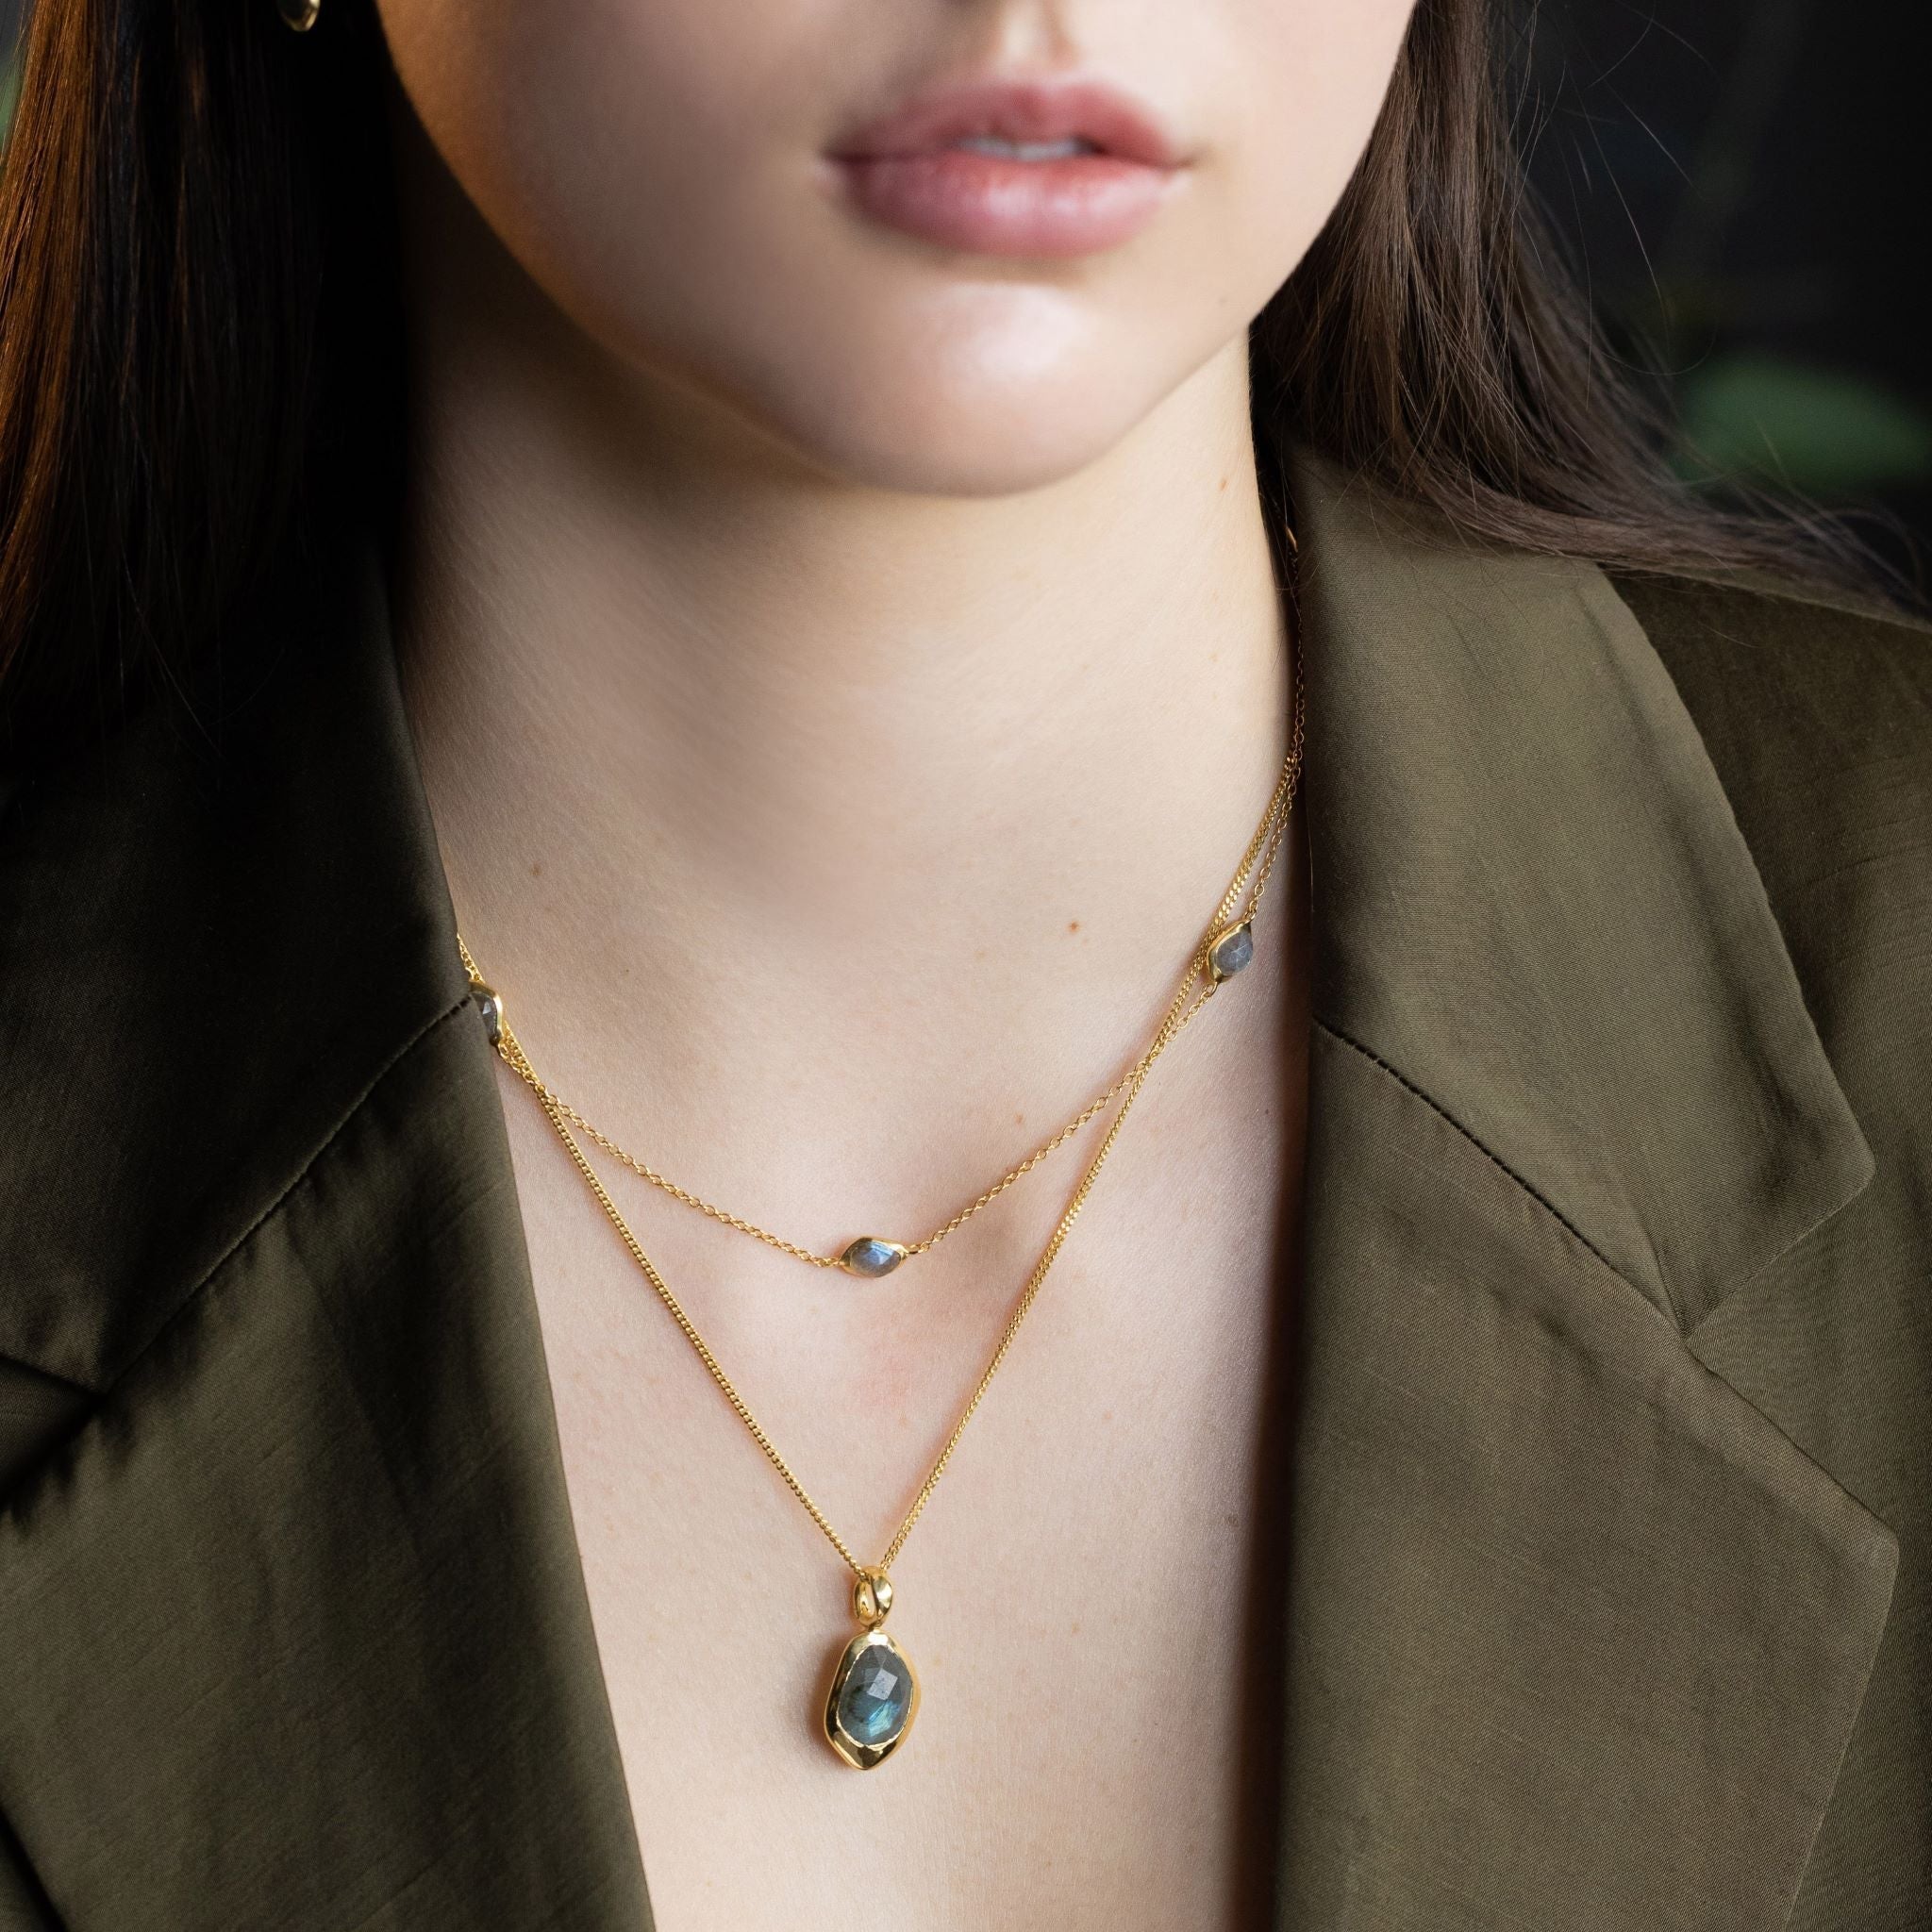 The Stepping Stone necklace features your choice of 8 stunning, natural gemstones - handcut to catch the light with every movement.